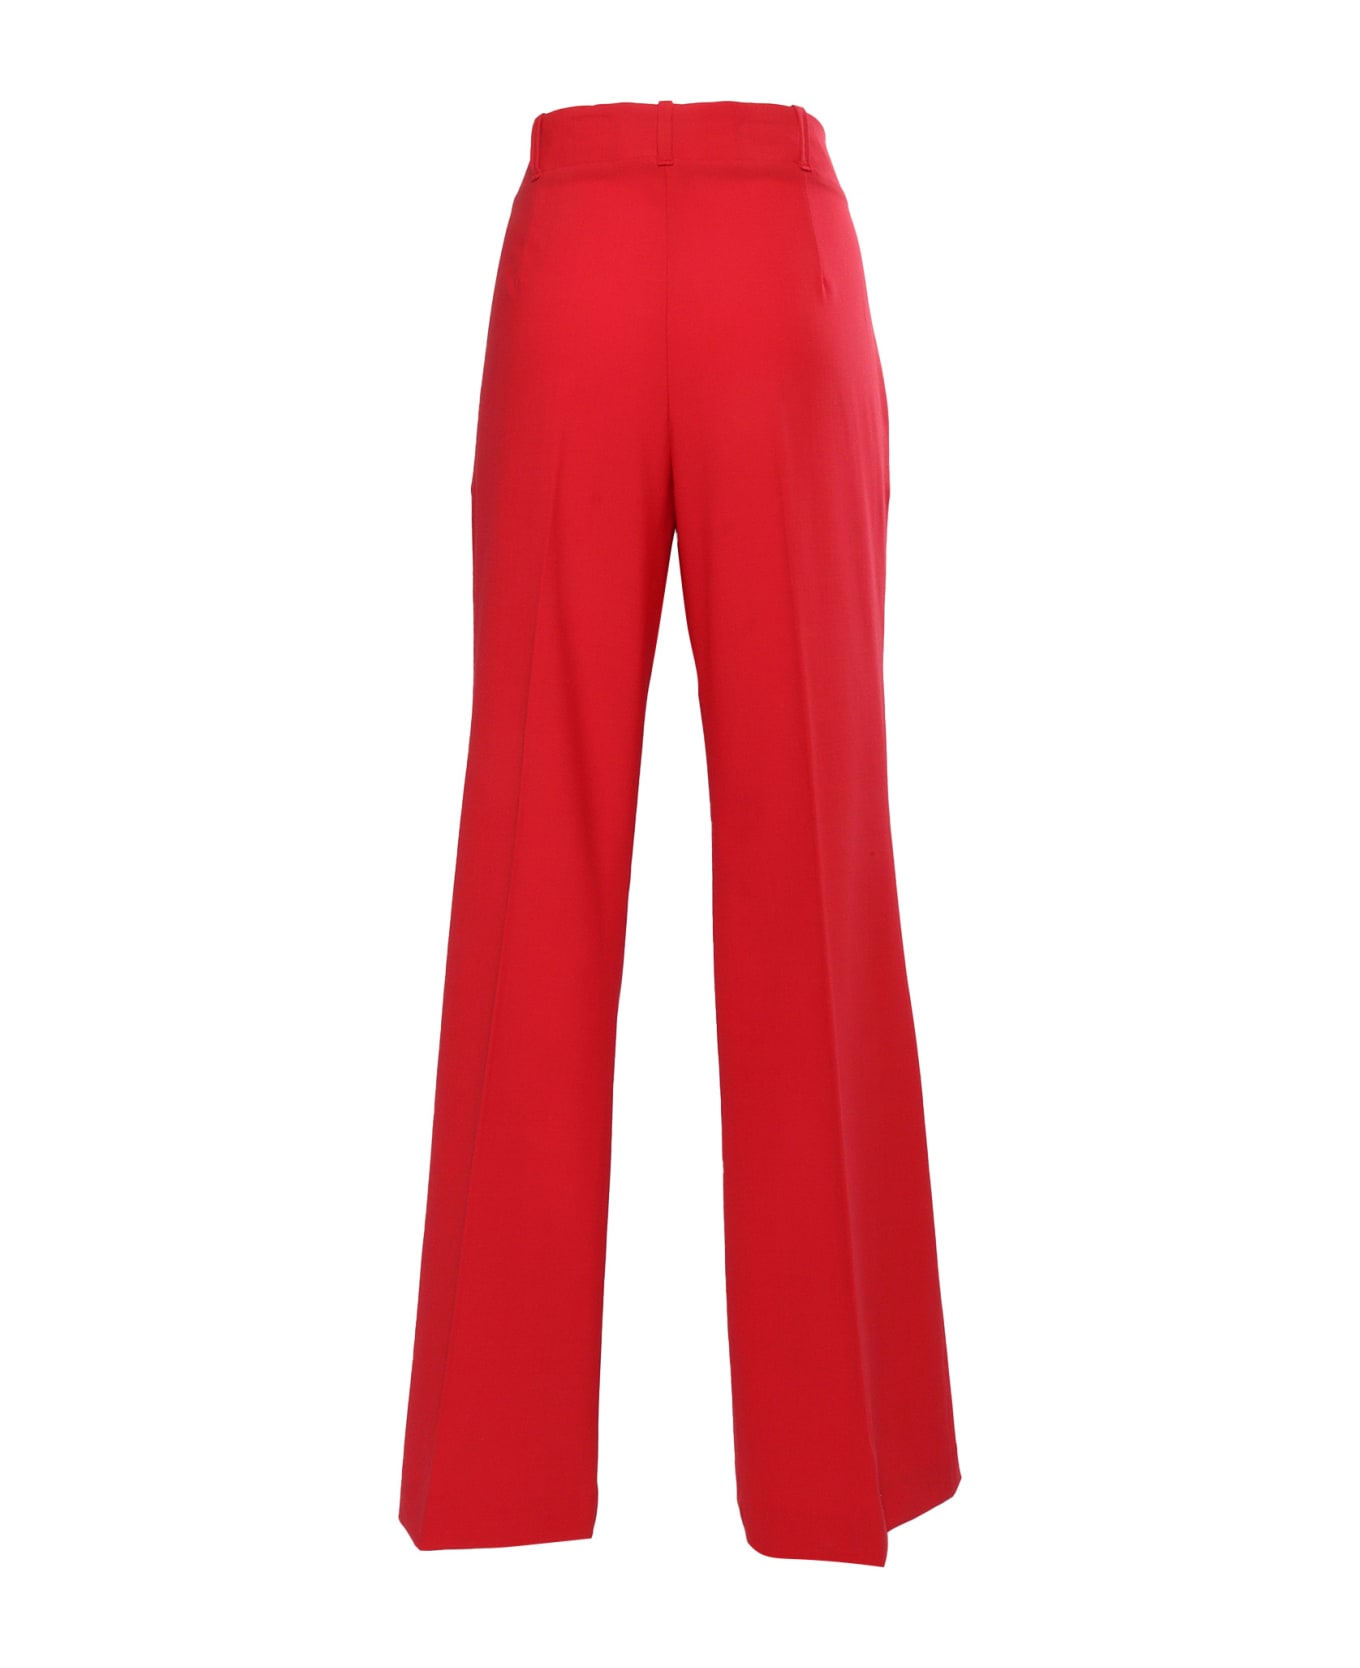 Ballantyne Red Flared Trousers - RED ボトムス